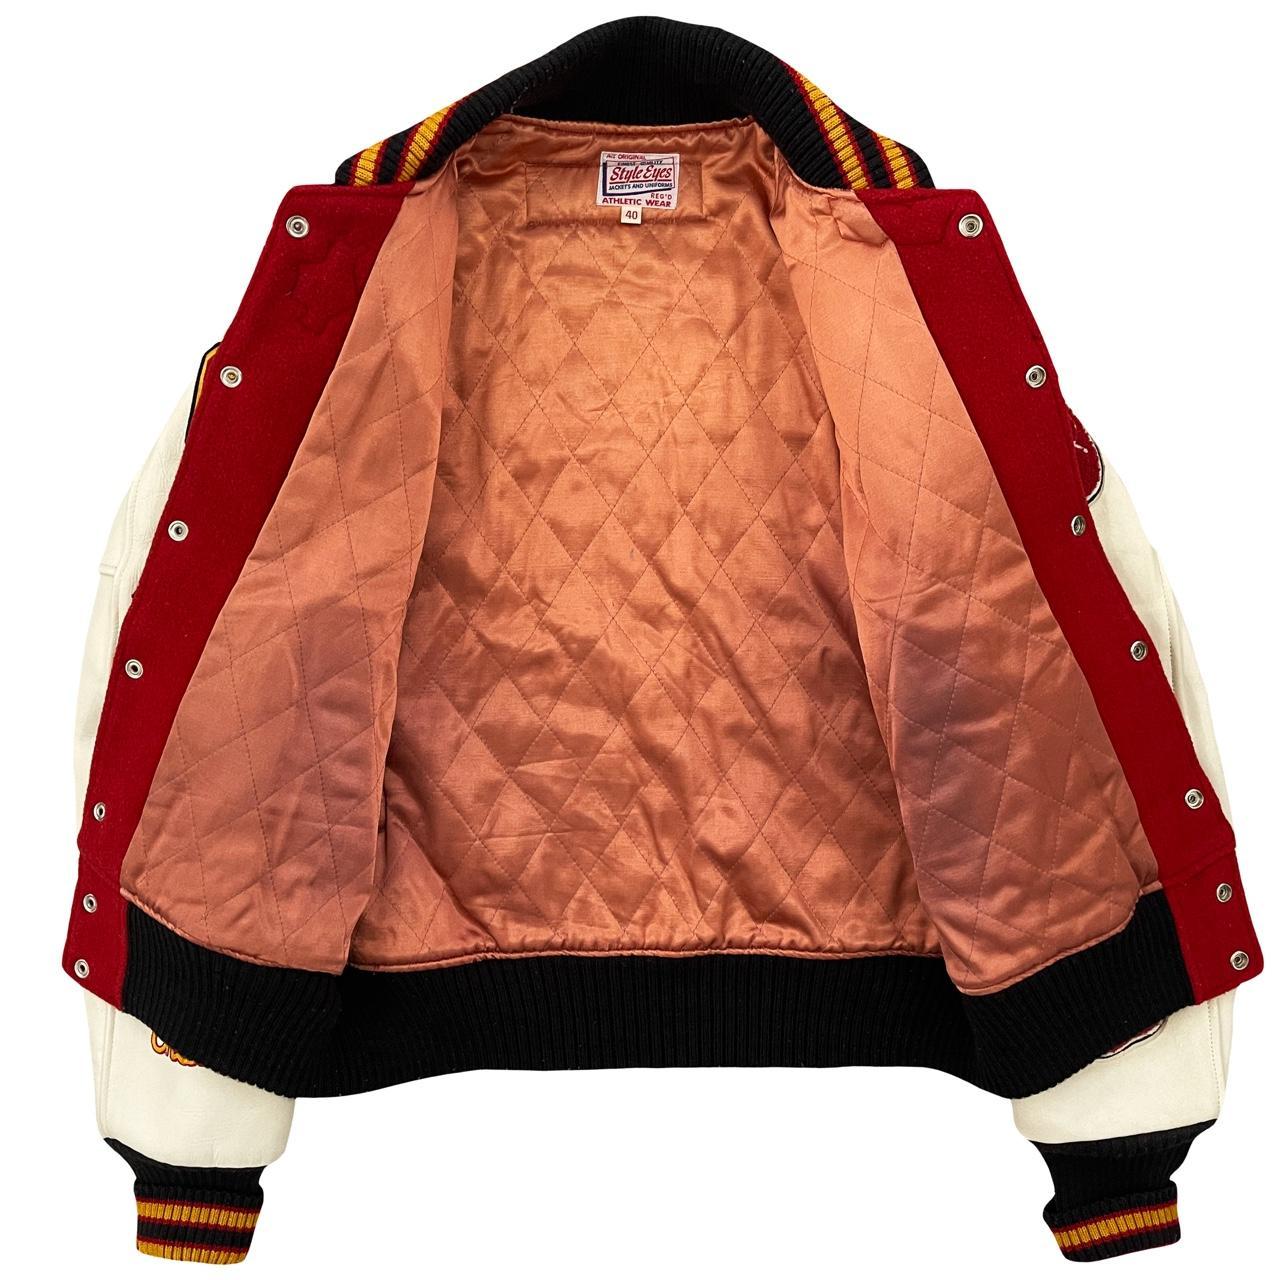 Men's Red and White Jacket (3)